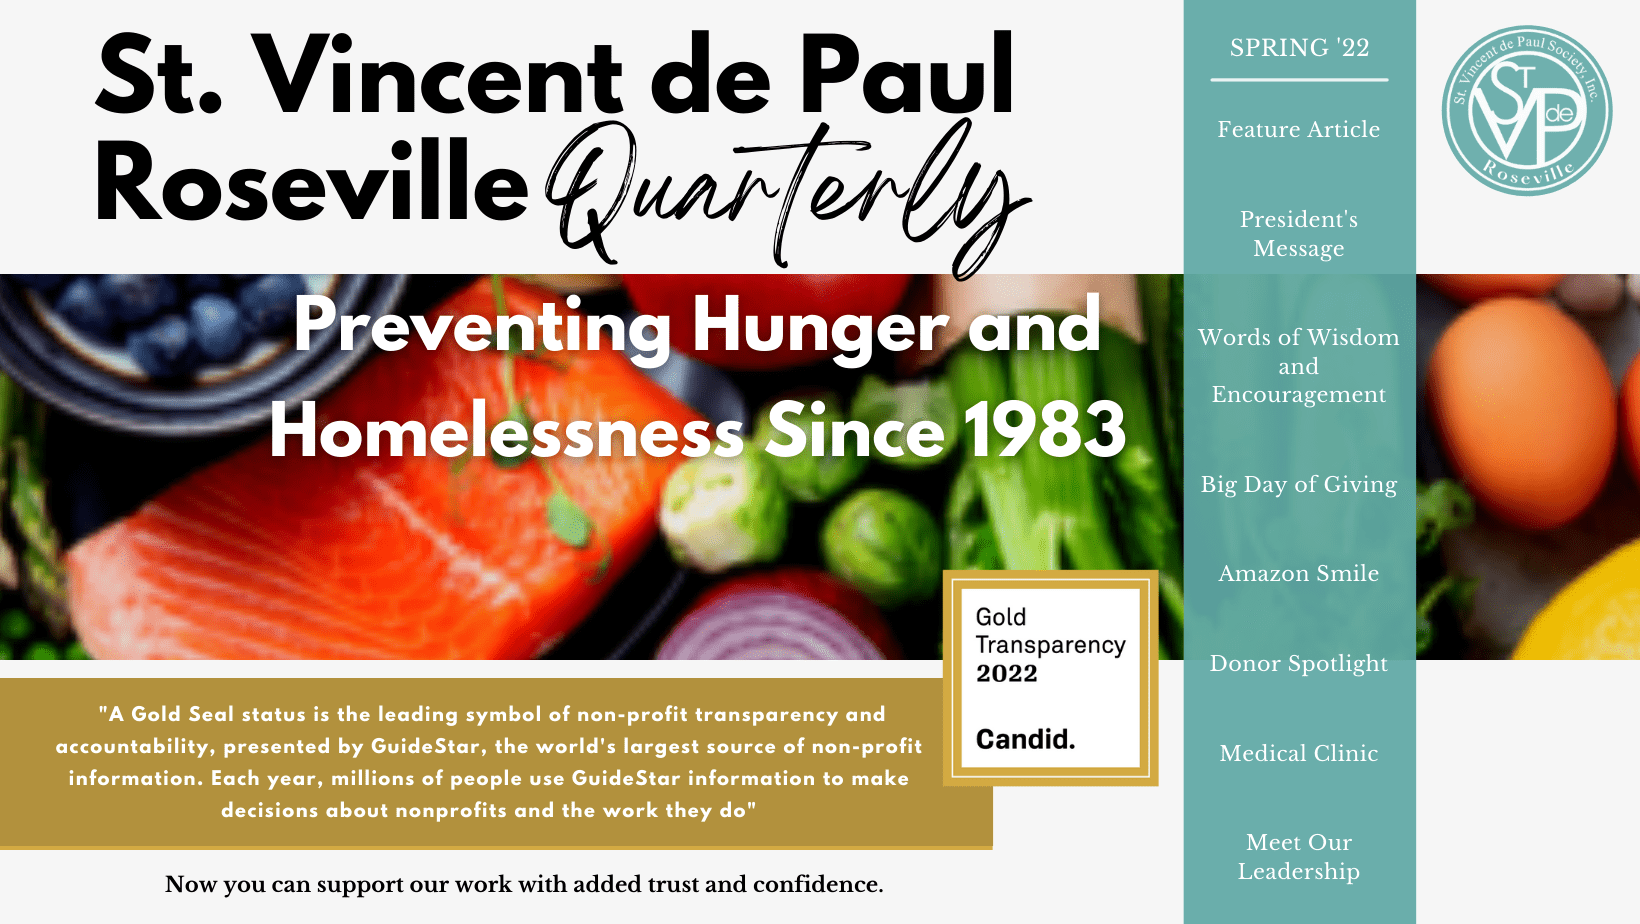 Title that says: St. Vincent de Paul Quarterly. There is a blurry picture in the background of different food with the motto "Preventing Hunger and Homelessness Since 1983" there is a list of article titles, and a guidestar gold certificate of Candid certification. Newsletter edition spring 22